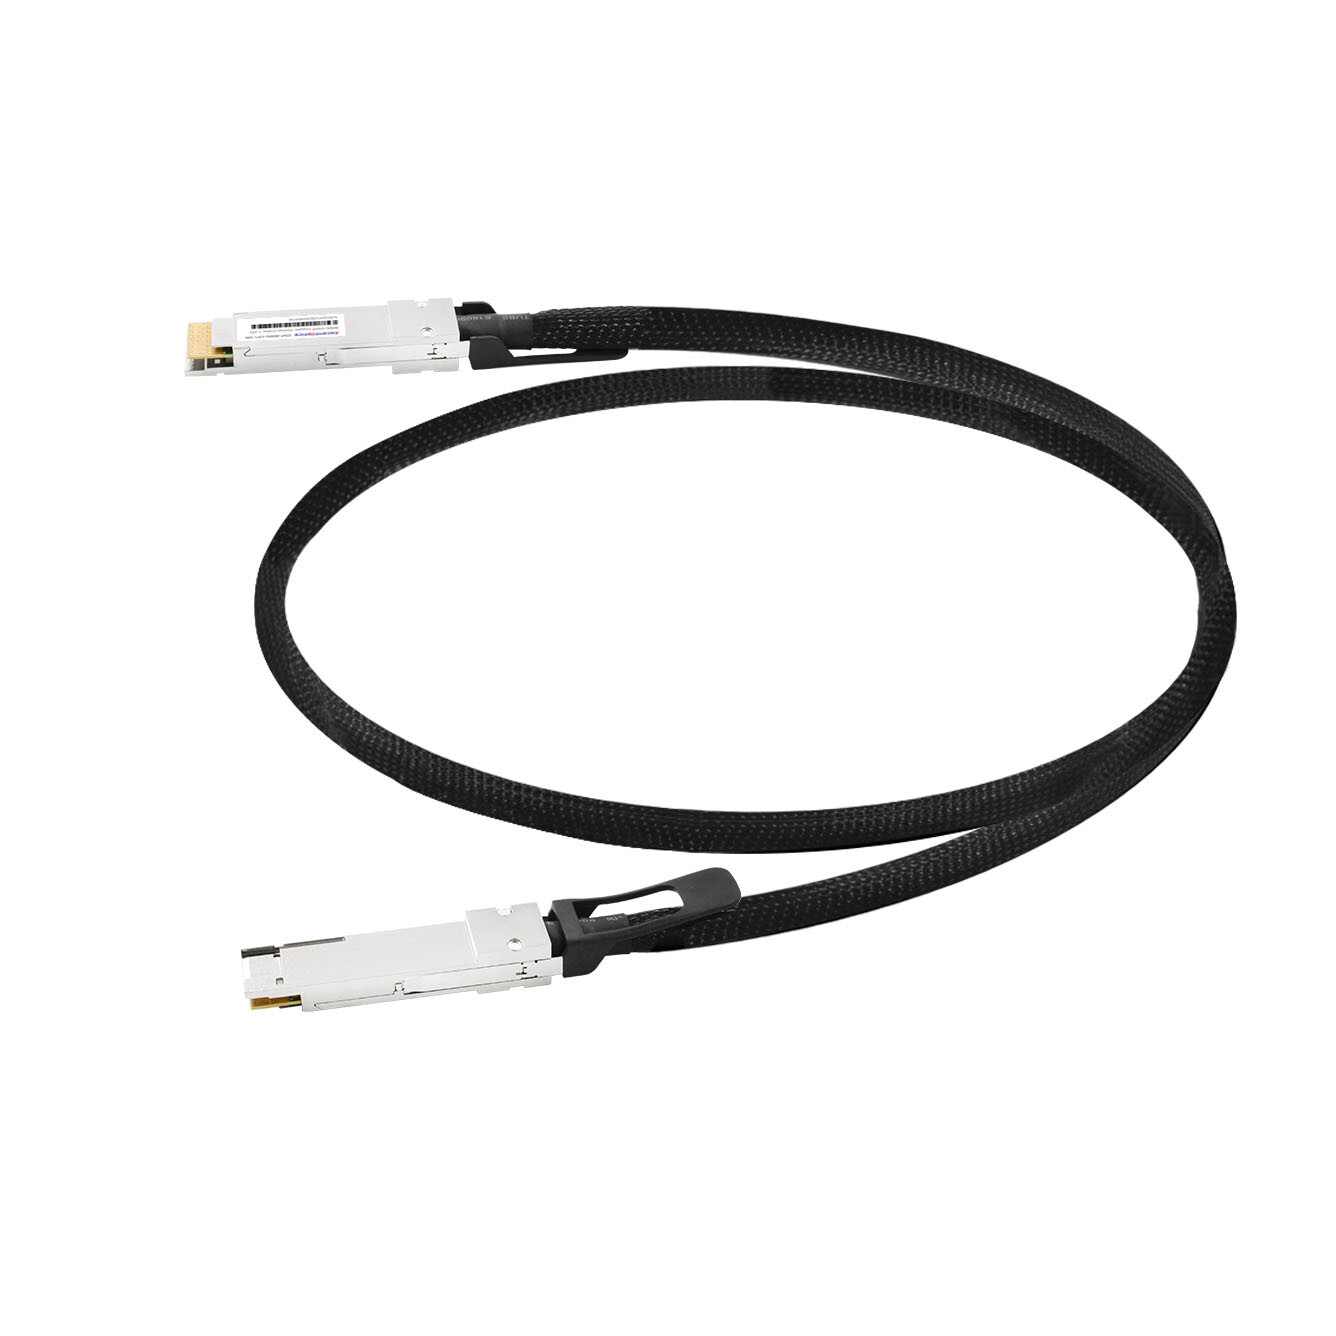 800G OSFP Copper DAC Cable,1.5 Meter,Passive